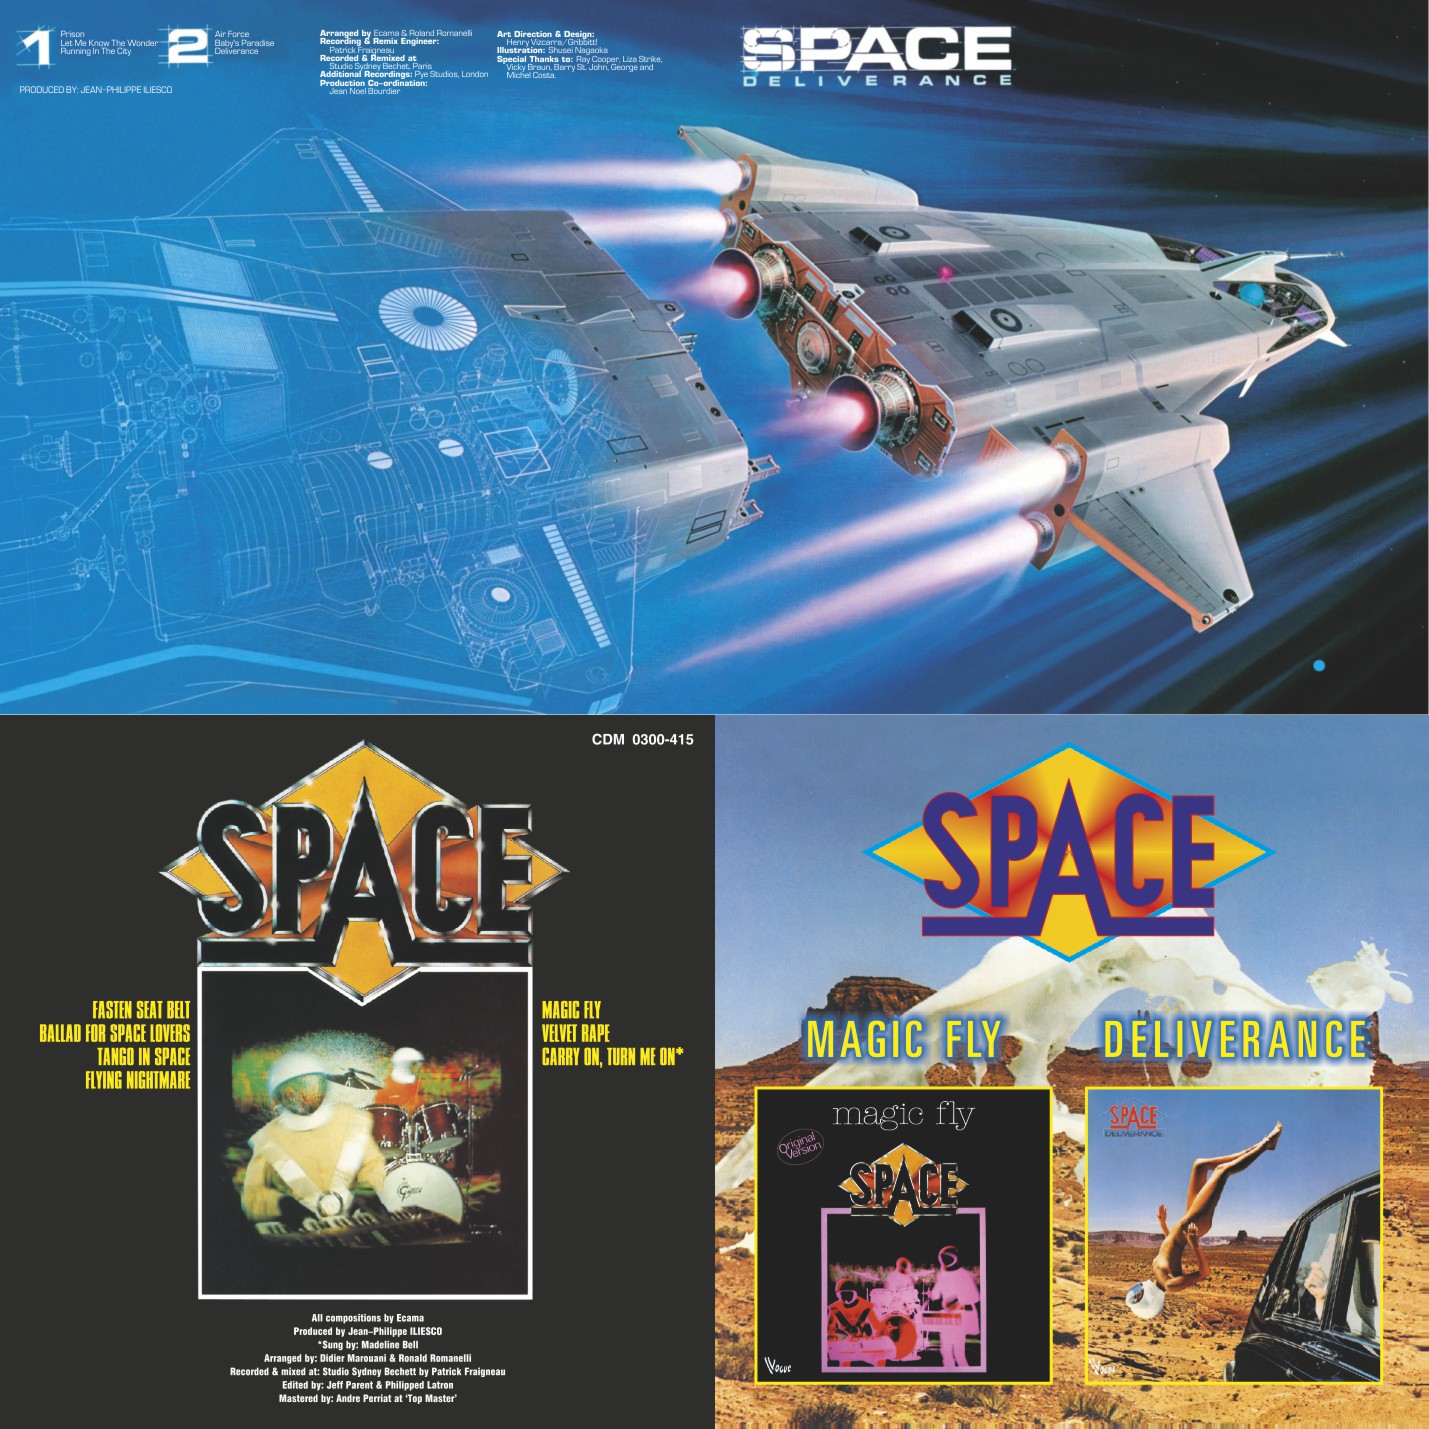 Fly to space. Space "Magic Fly". Спейс Мэджик Флай. Space Magic Fly 1977. Space Magic Fly с крестом.